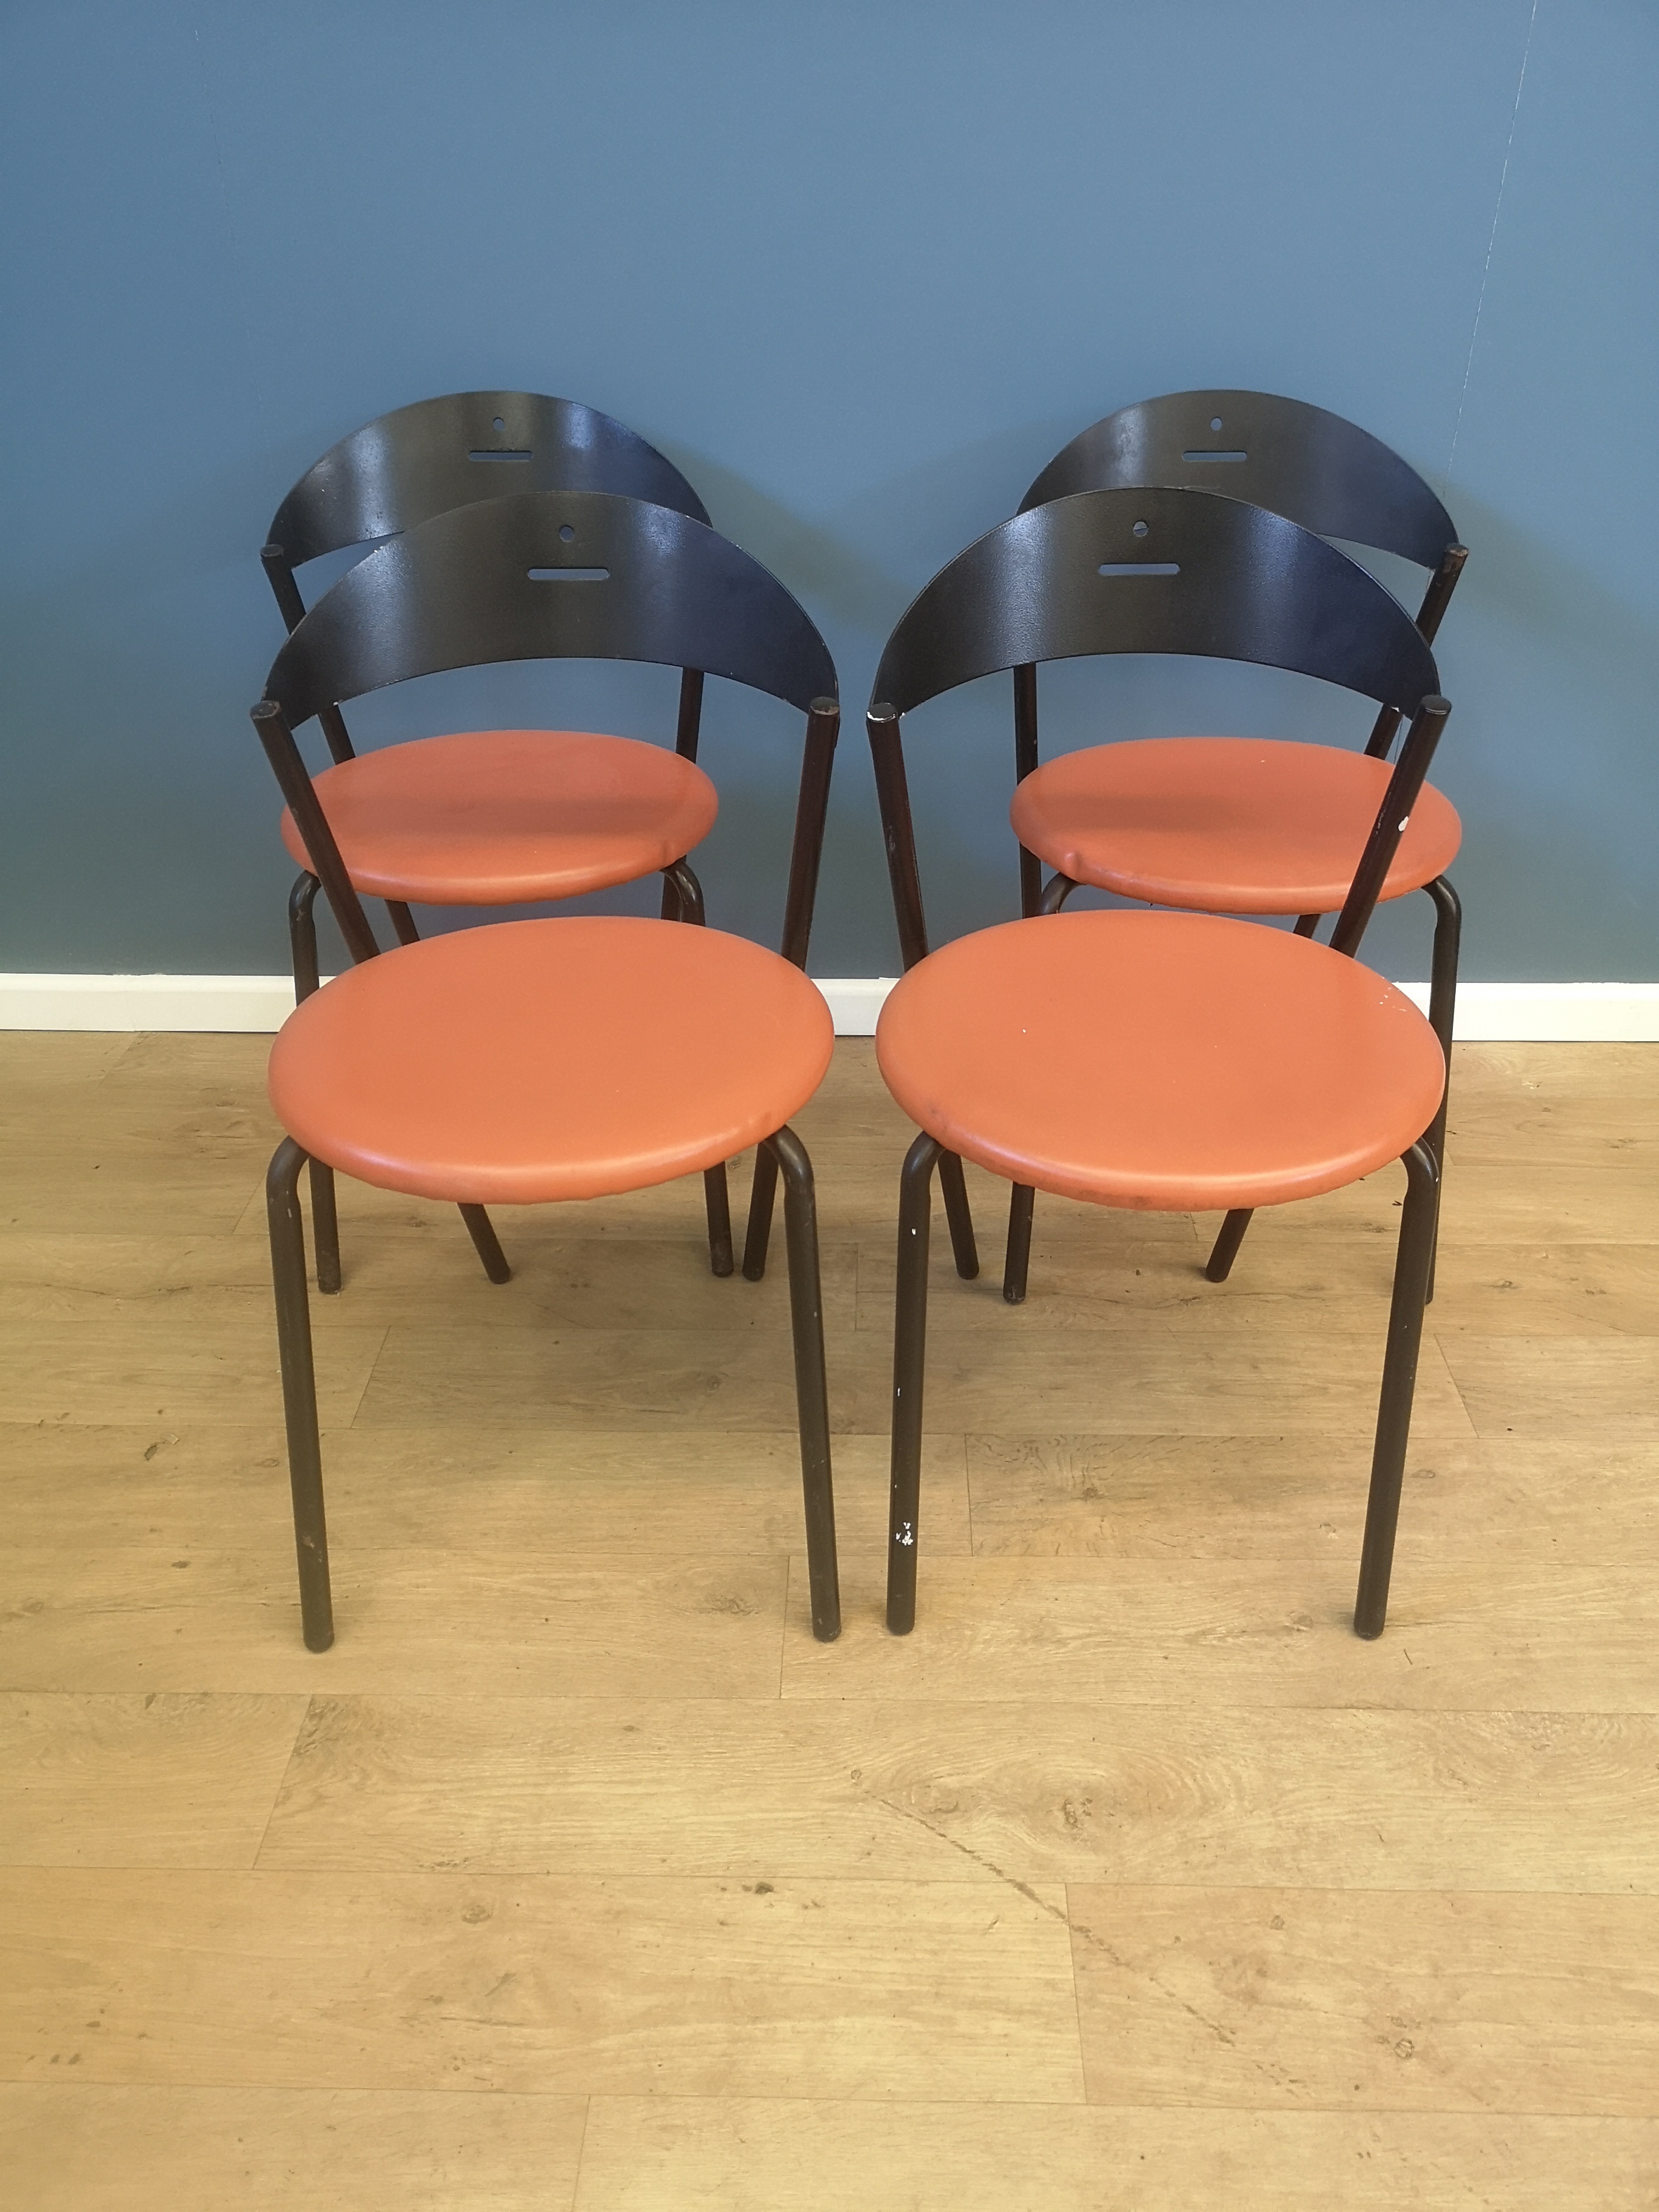 Four FlyLine dining chairs